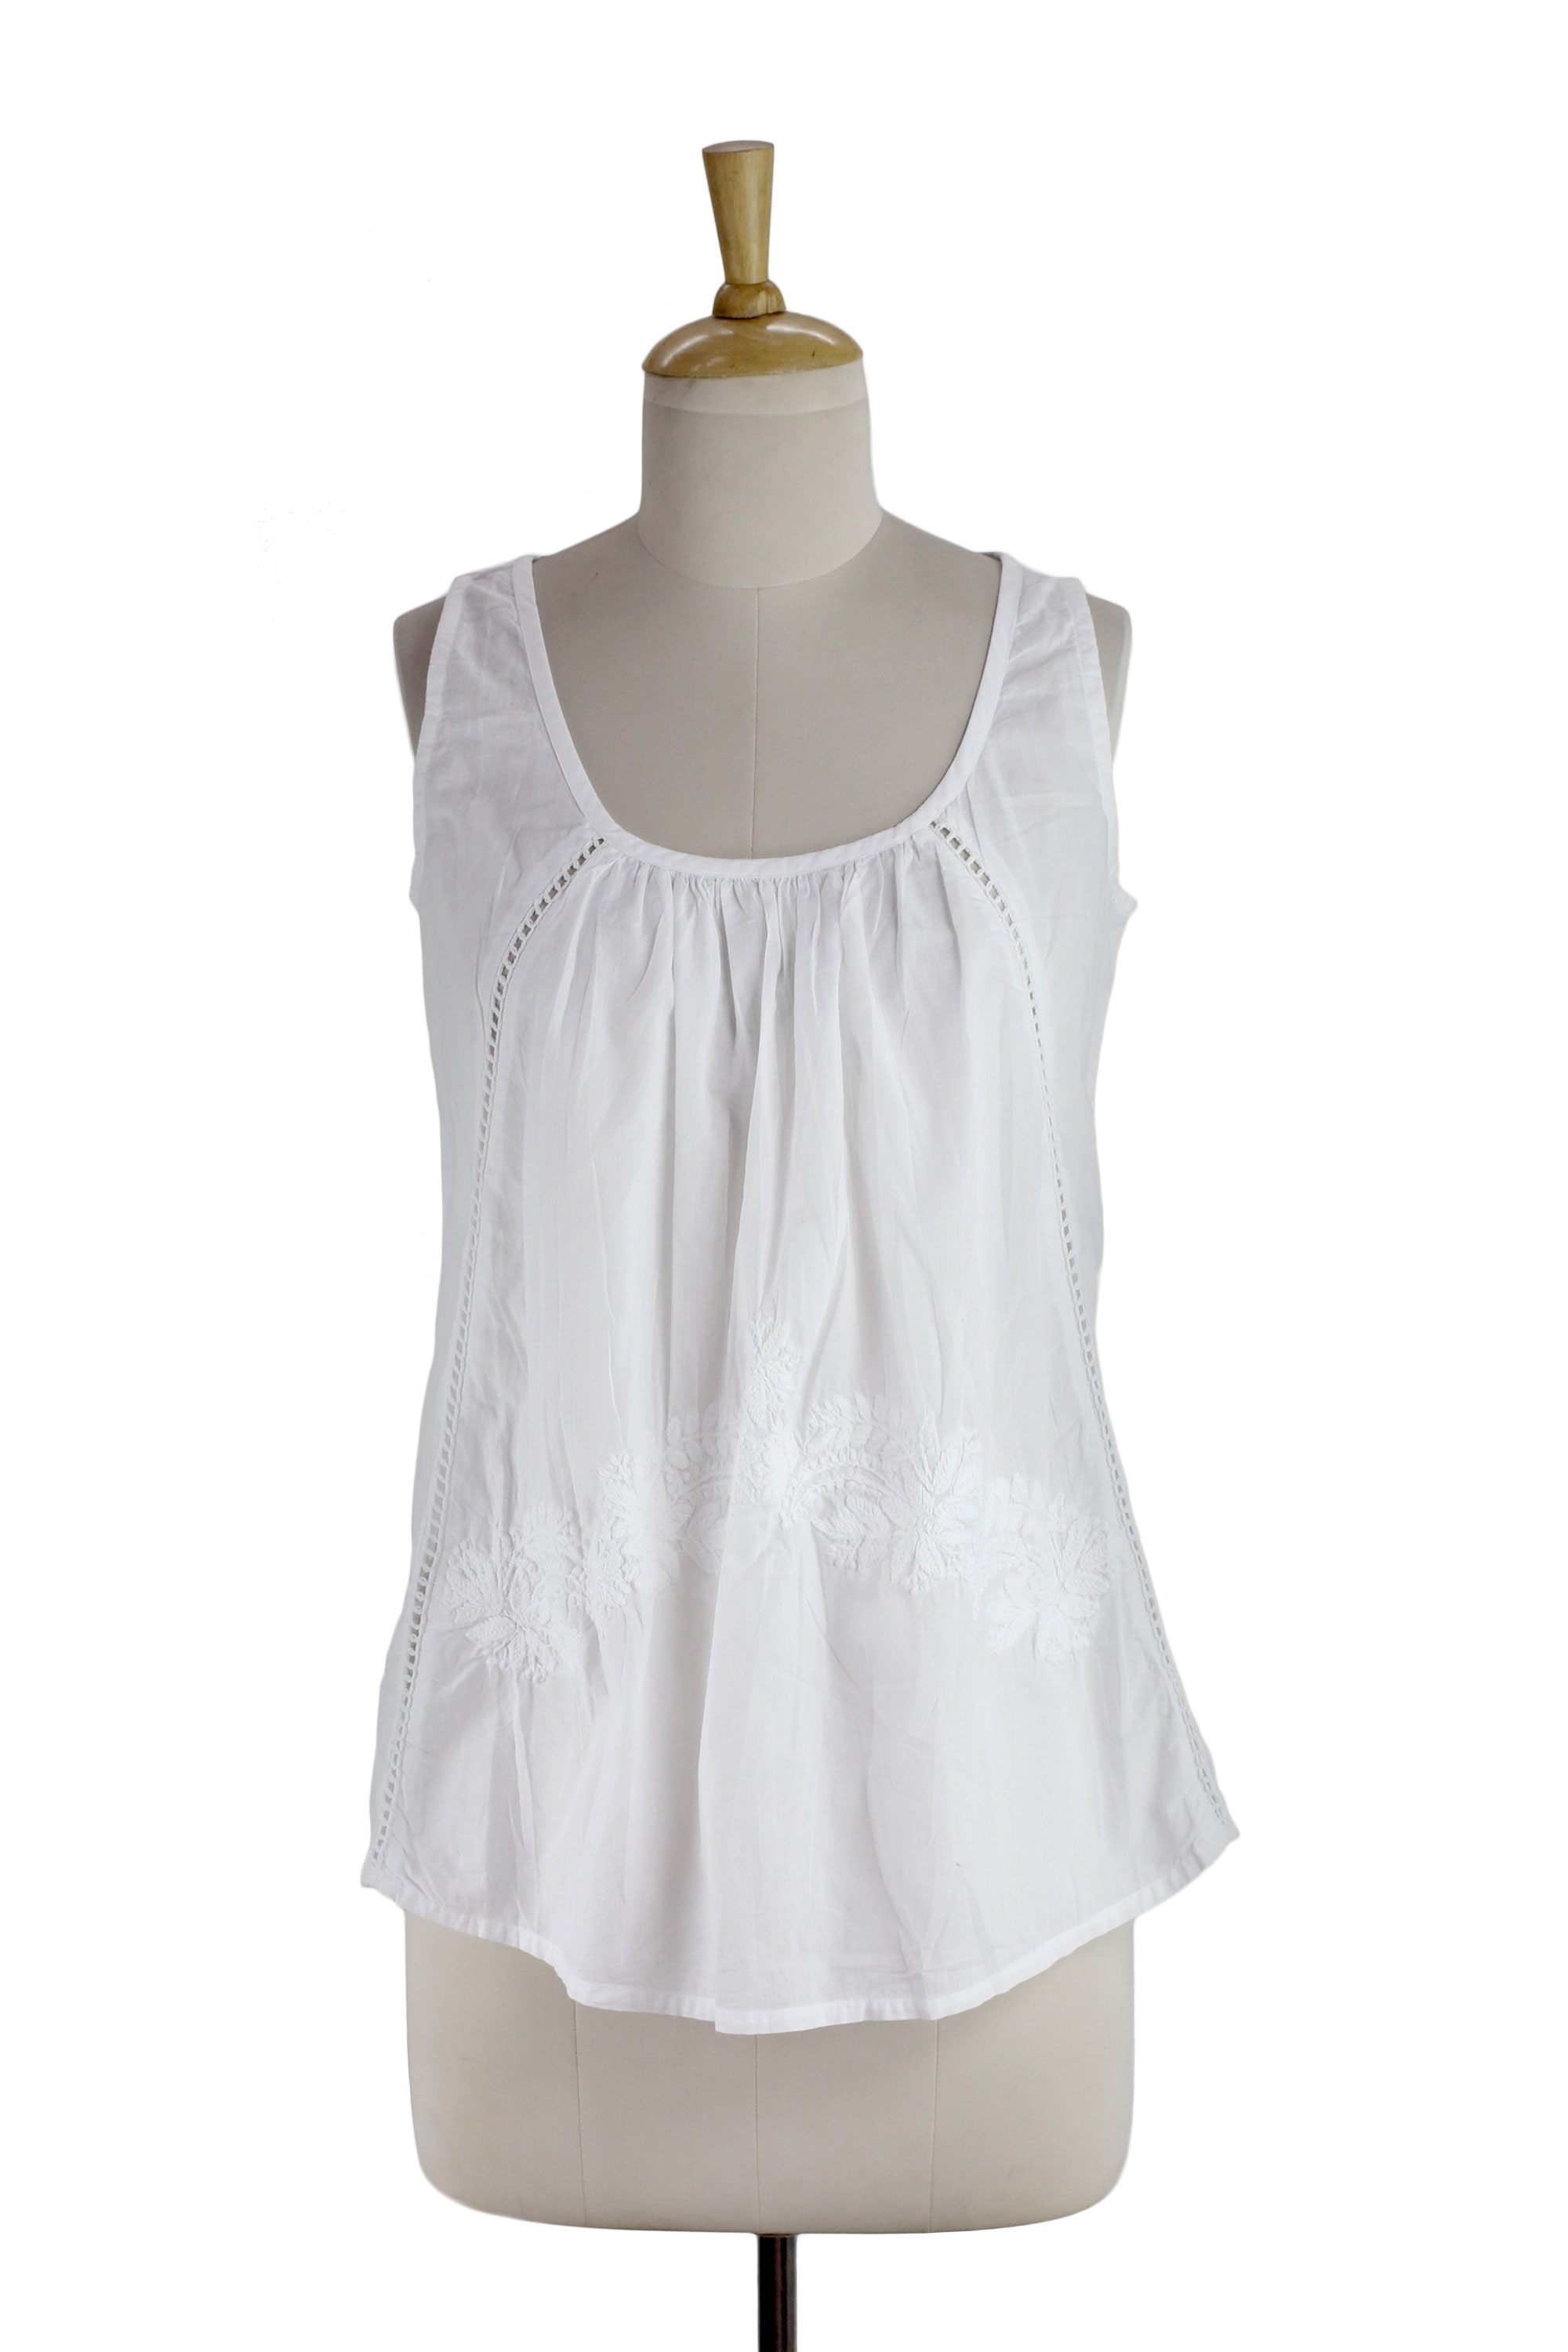 Hand Embroidered Sleeveless White Cotton Smock Top - Floral Whisper ...